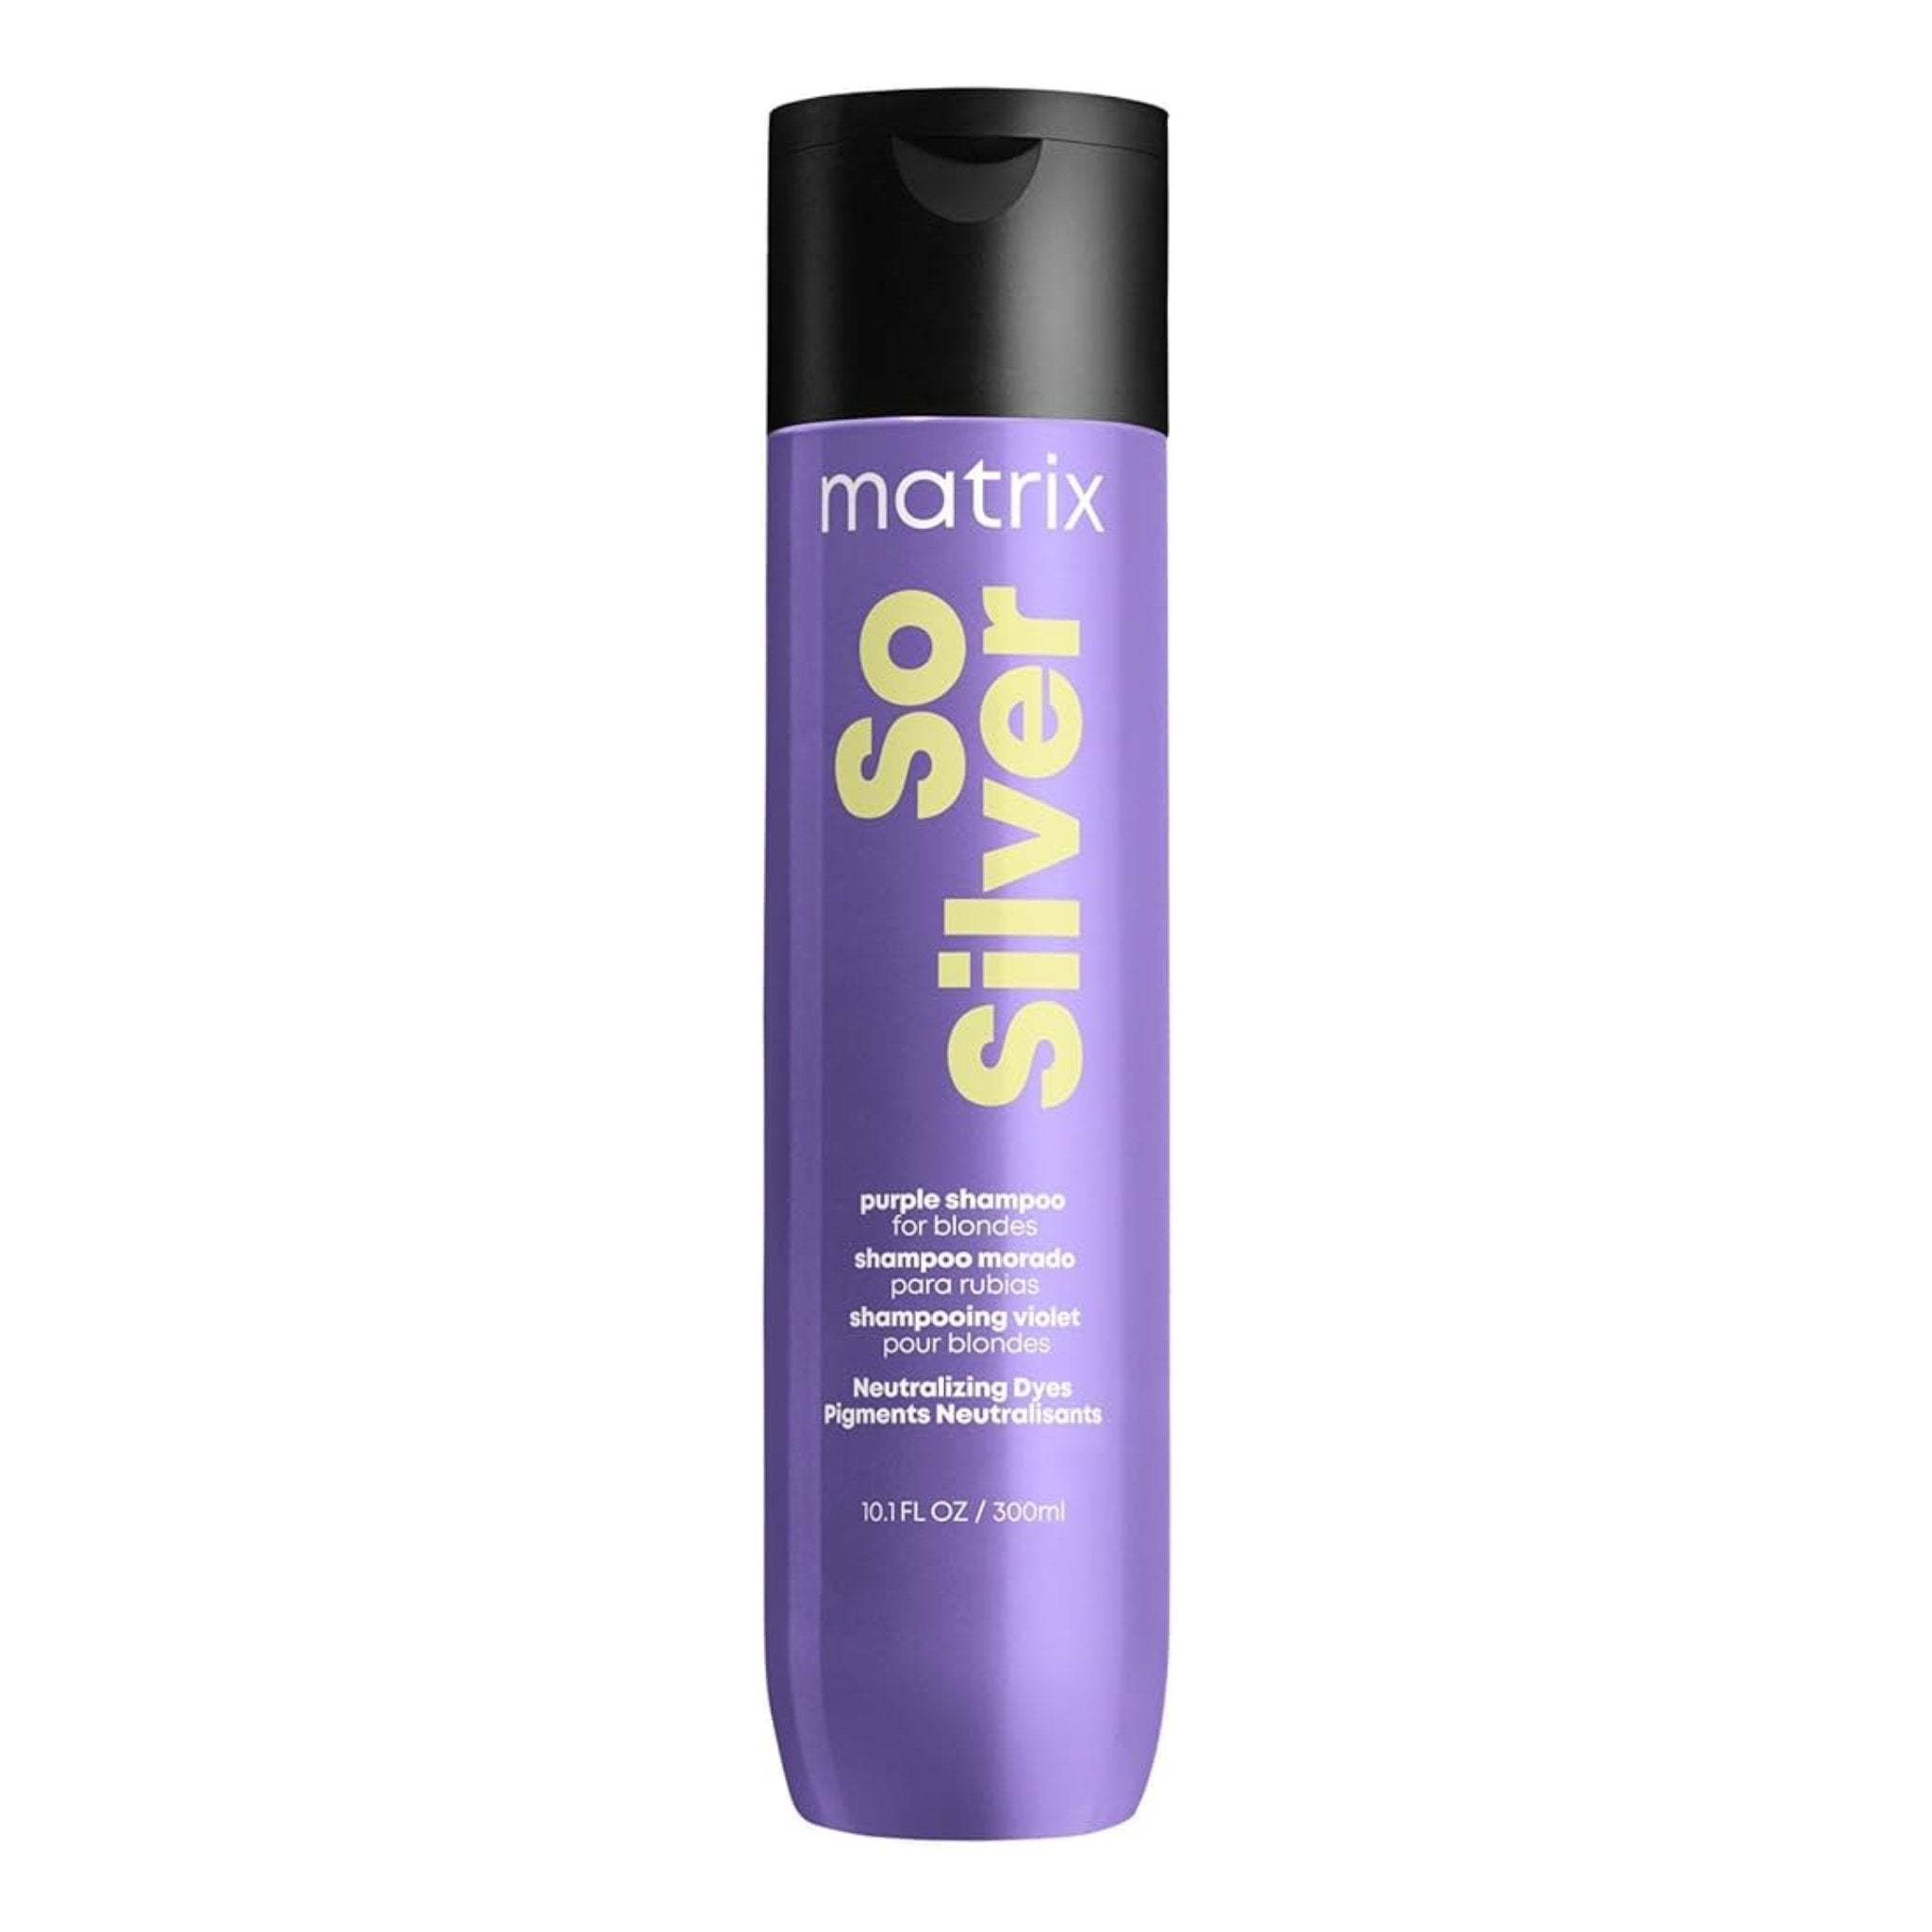 Matrix. Total Results Shampoing So Silver Color Obsessed - 300 ml - Concept C. Shop